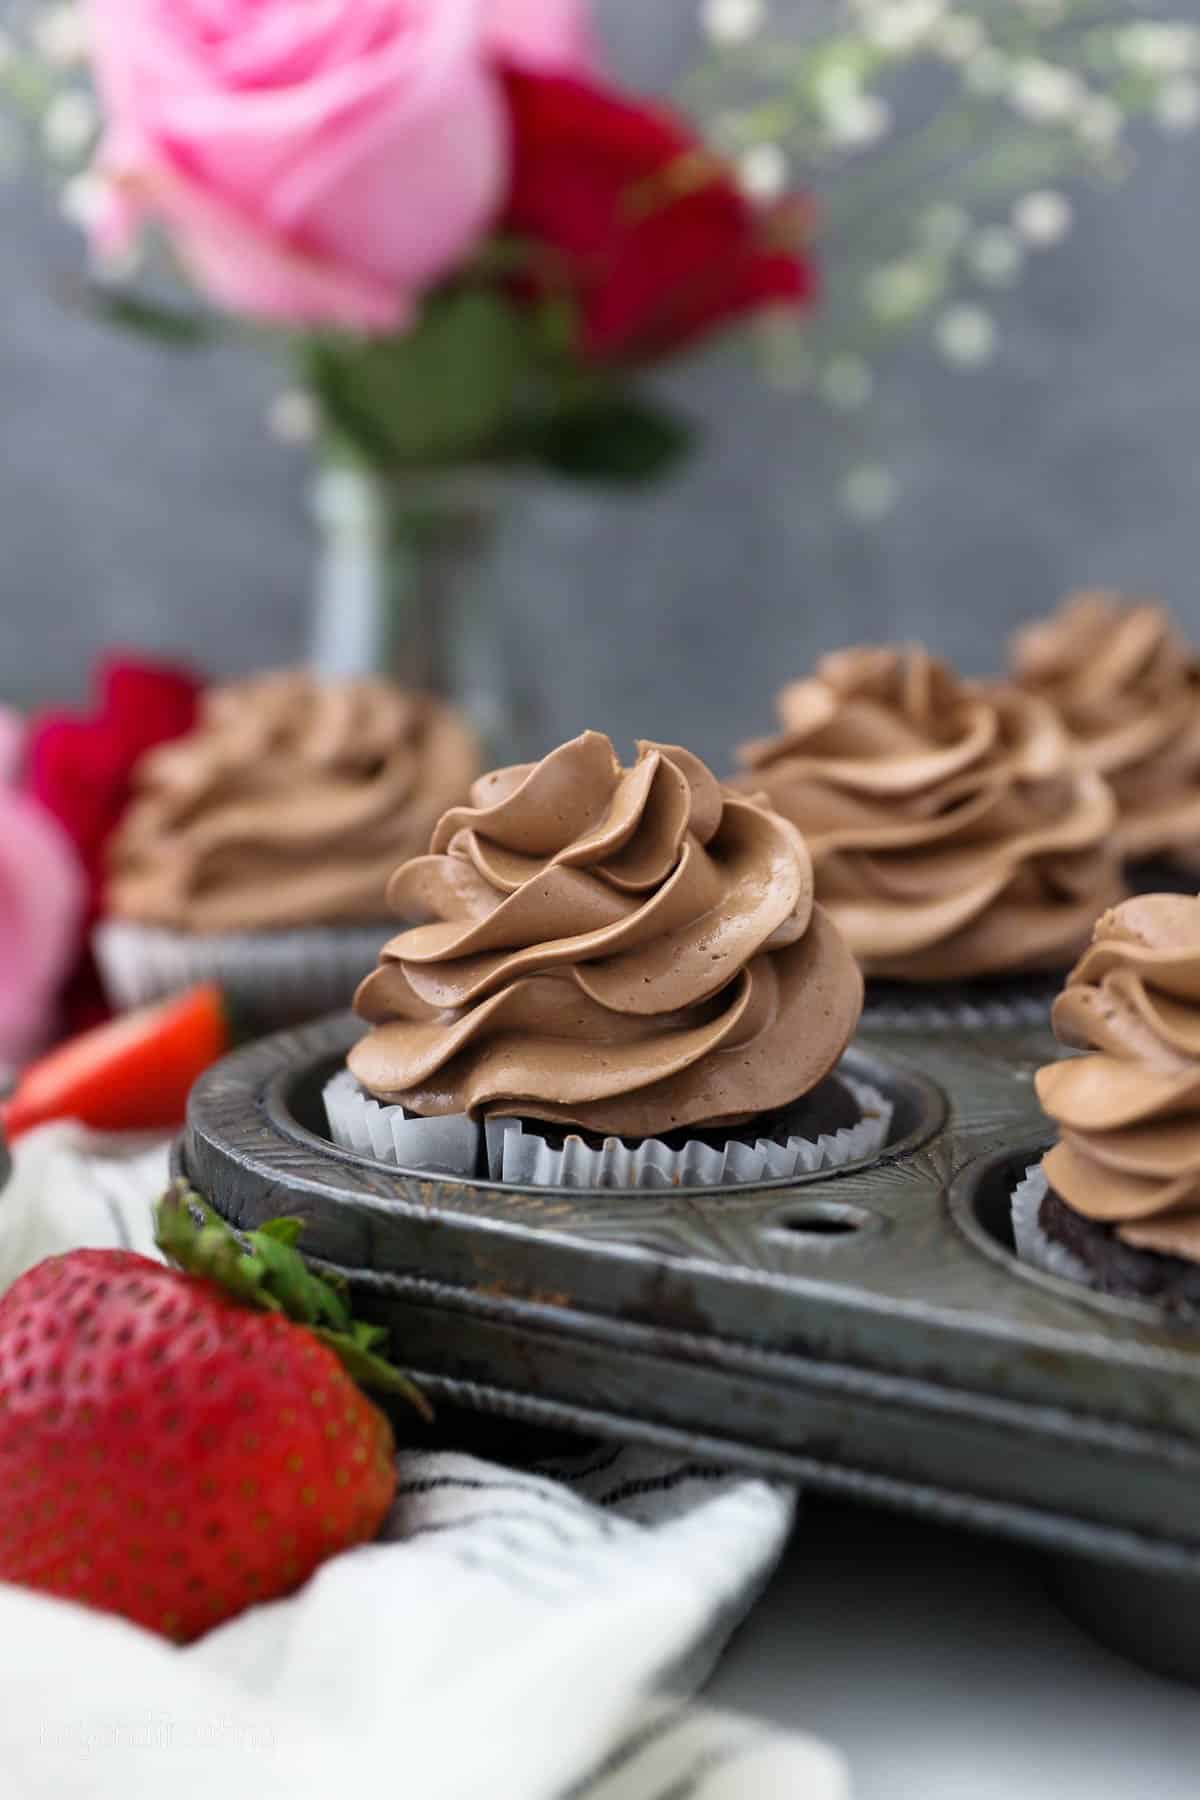 Cupcakes frosted with chocolate Swiss meringue buttercream in a muffin tin.